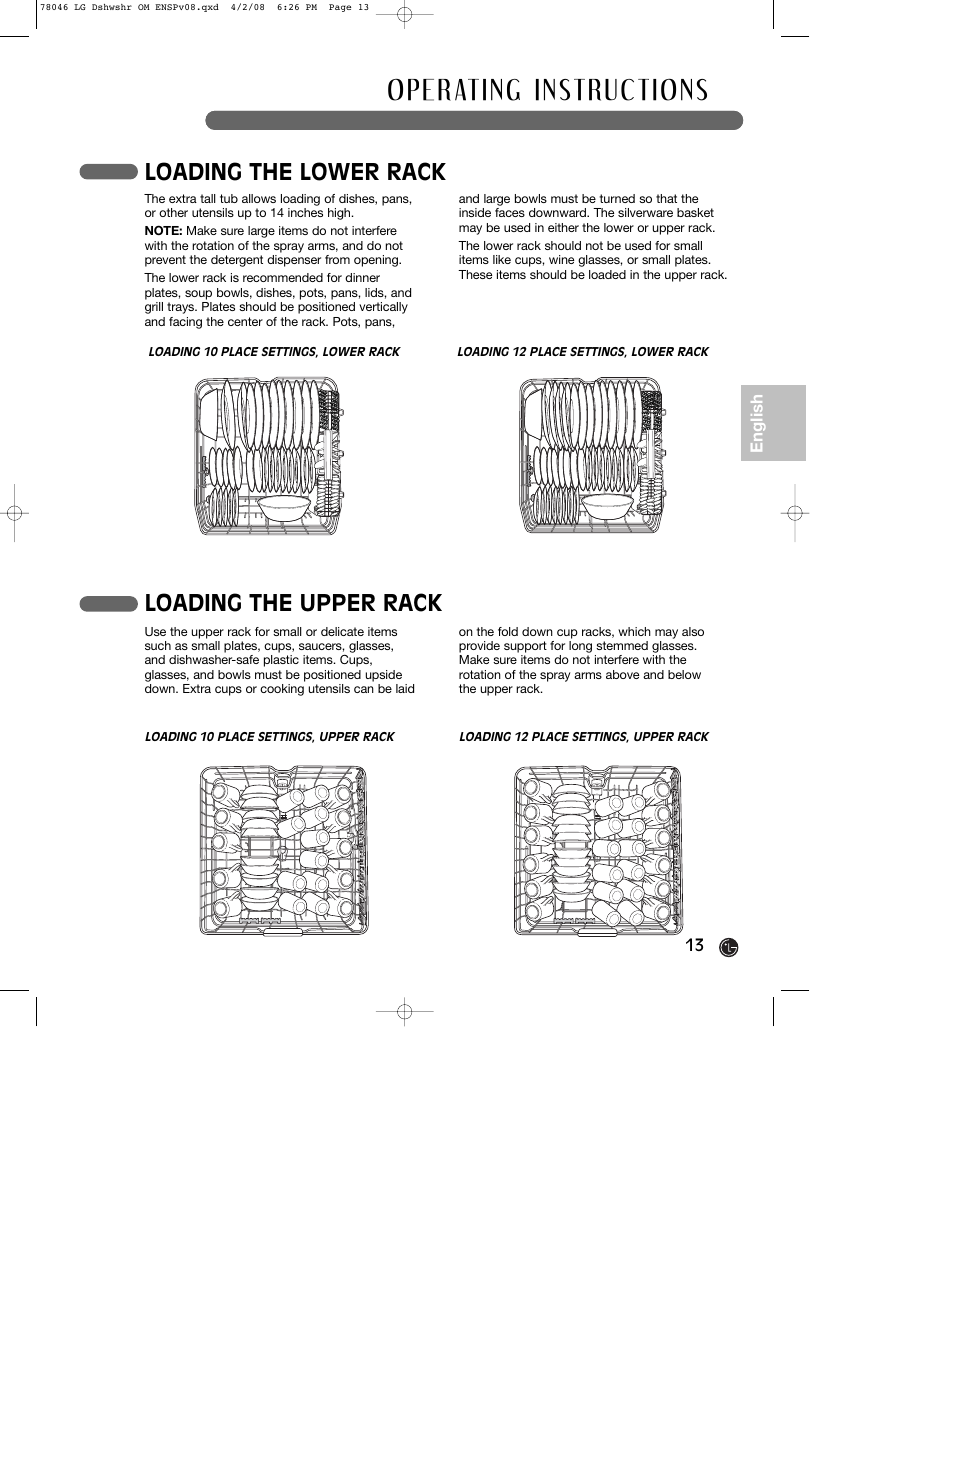 Loading the lower rack, Loading the upper rack | LG LDS4821ST User Manual | Page 13 / 68